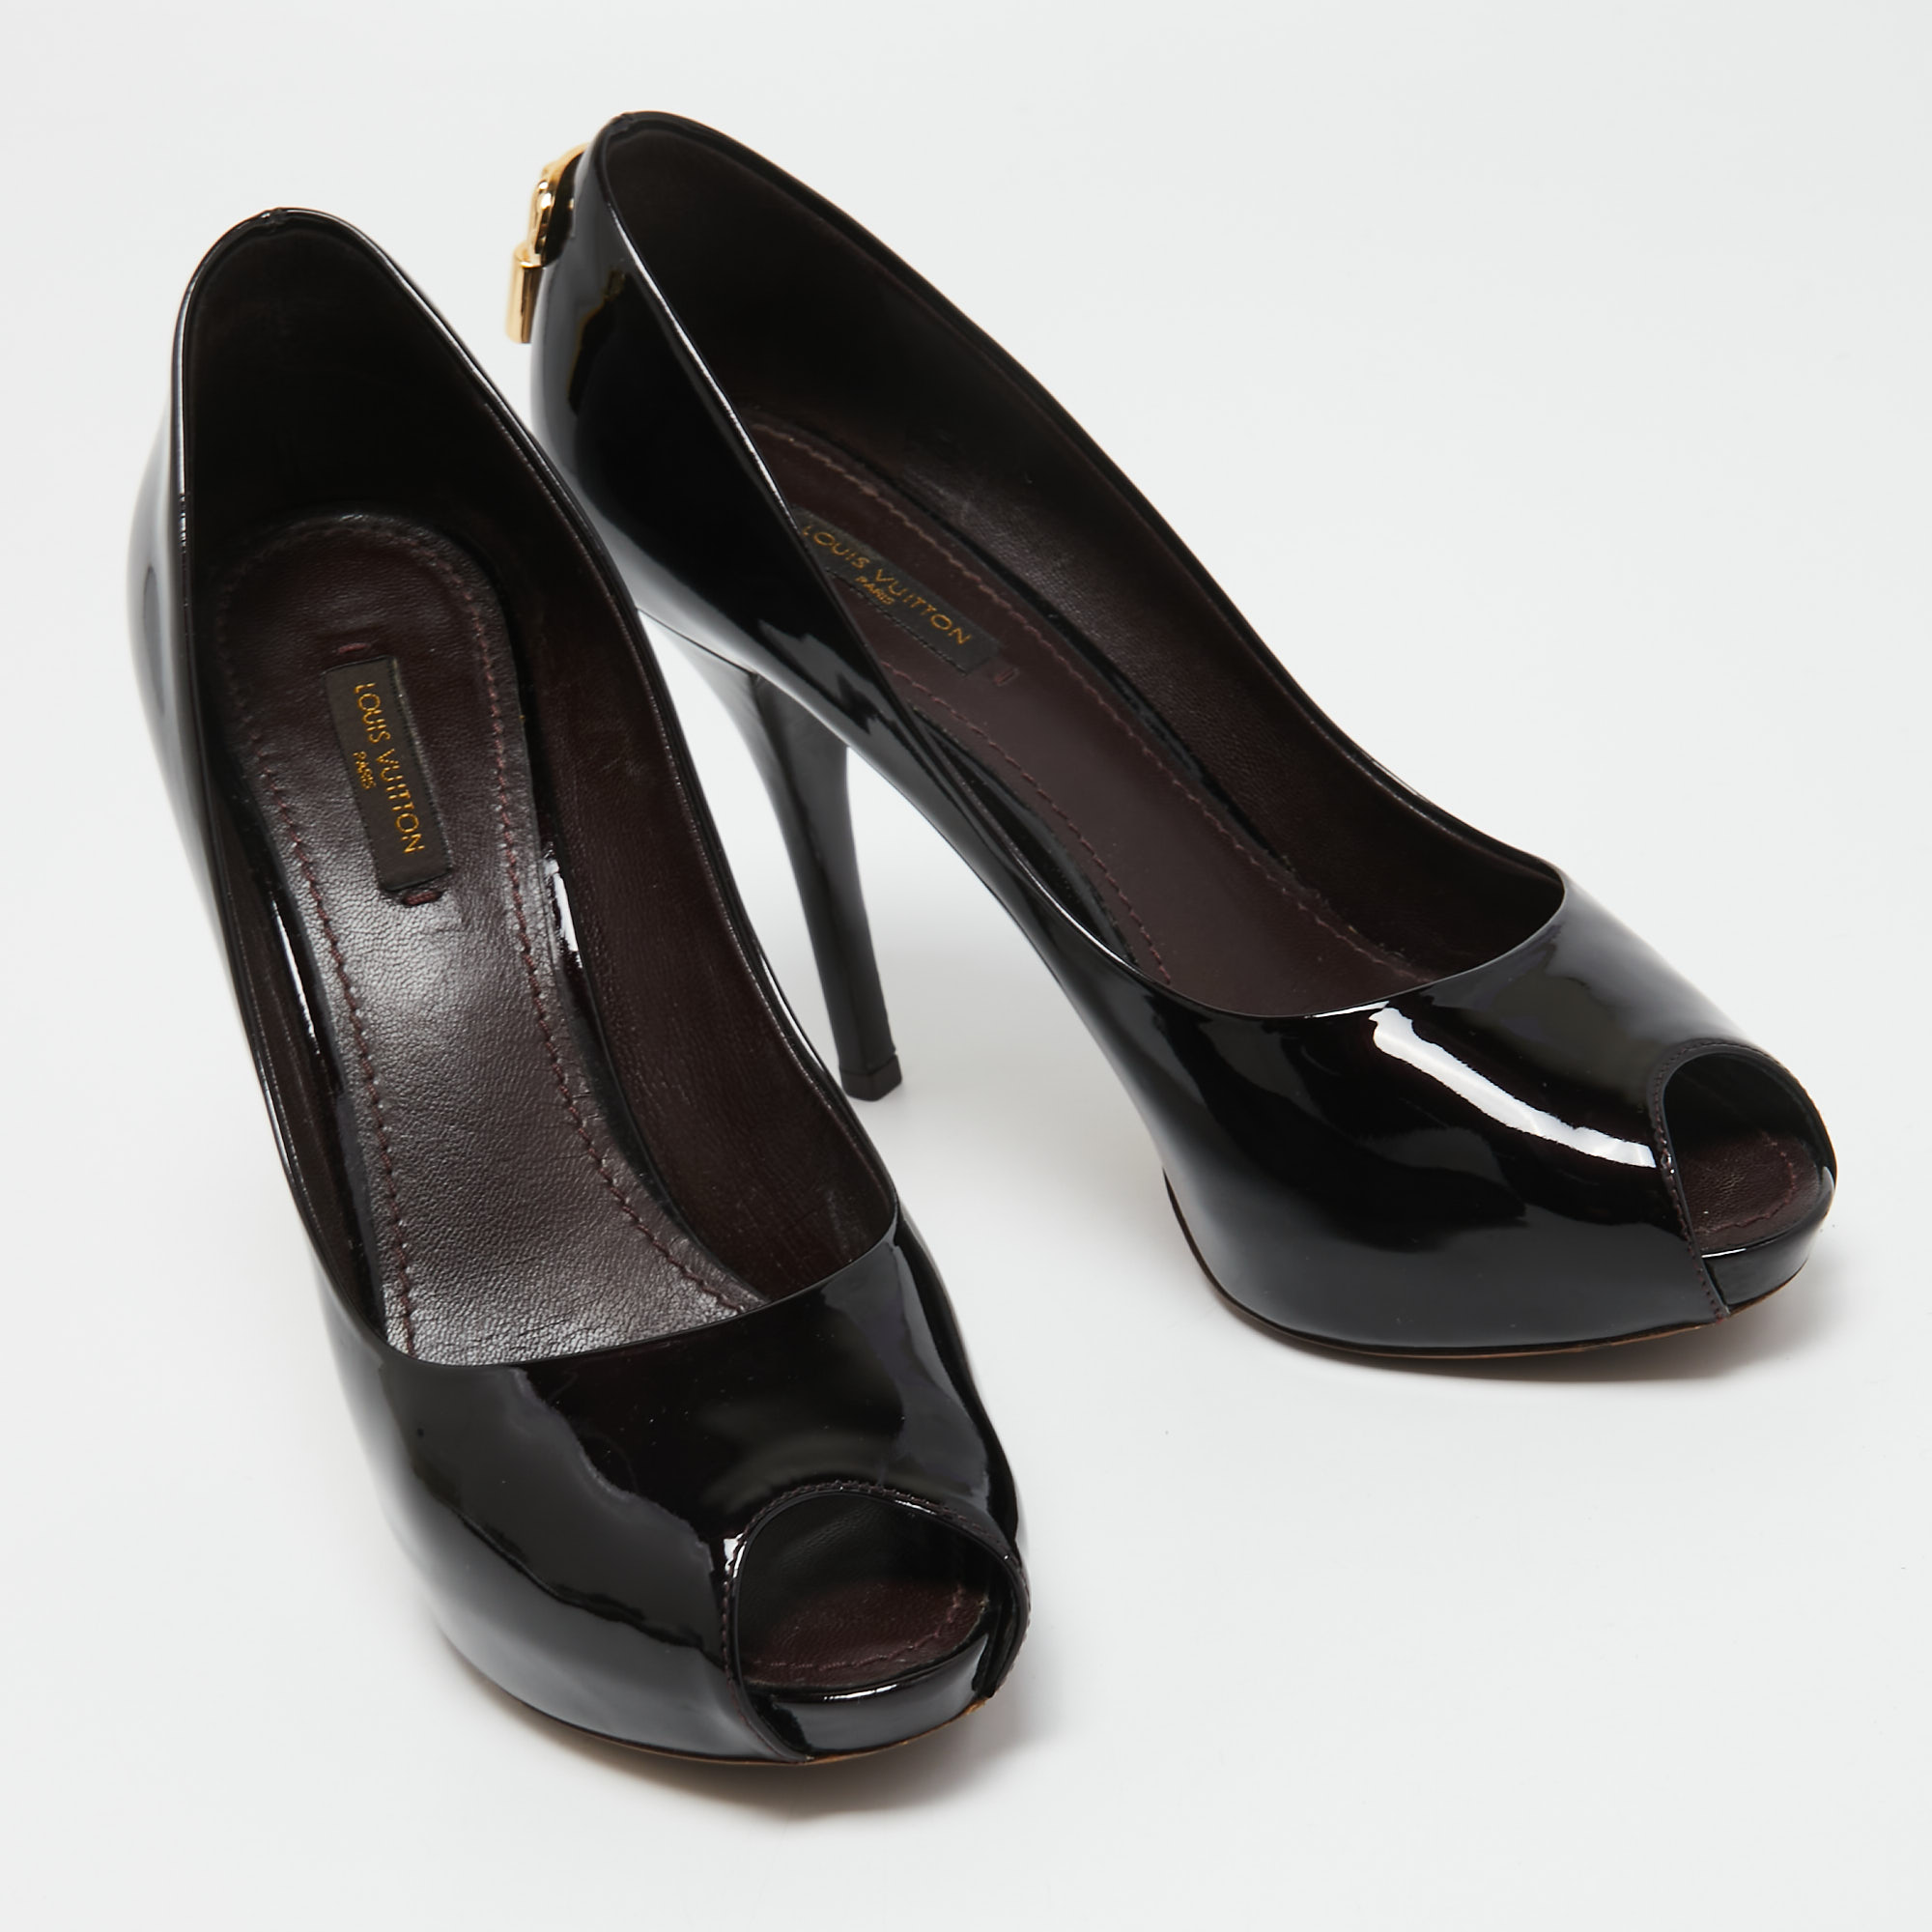 Louis Vuitton Burgundy Patent Leather Oh Really! Pumps Size 38